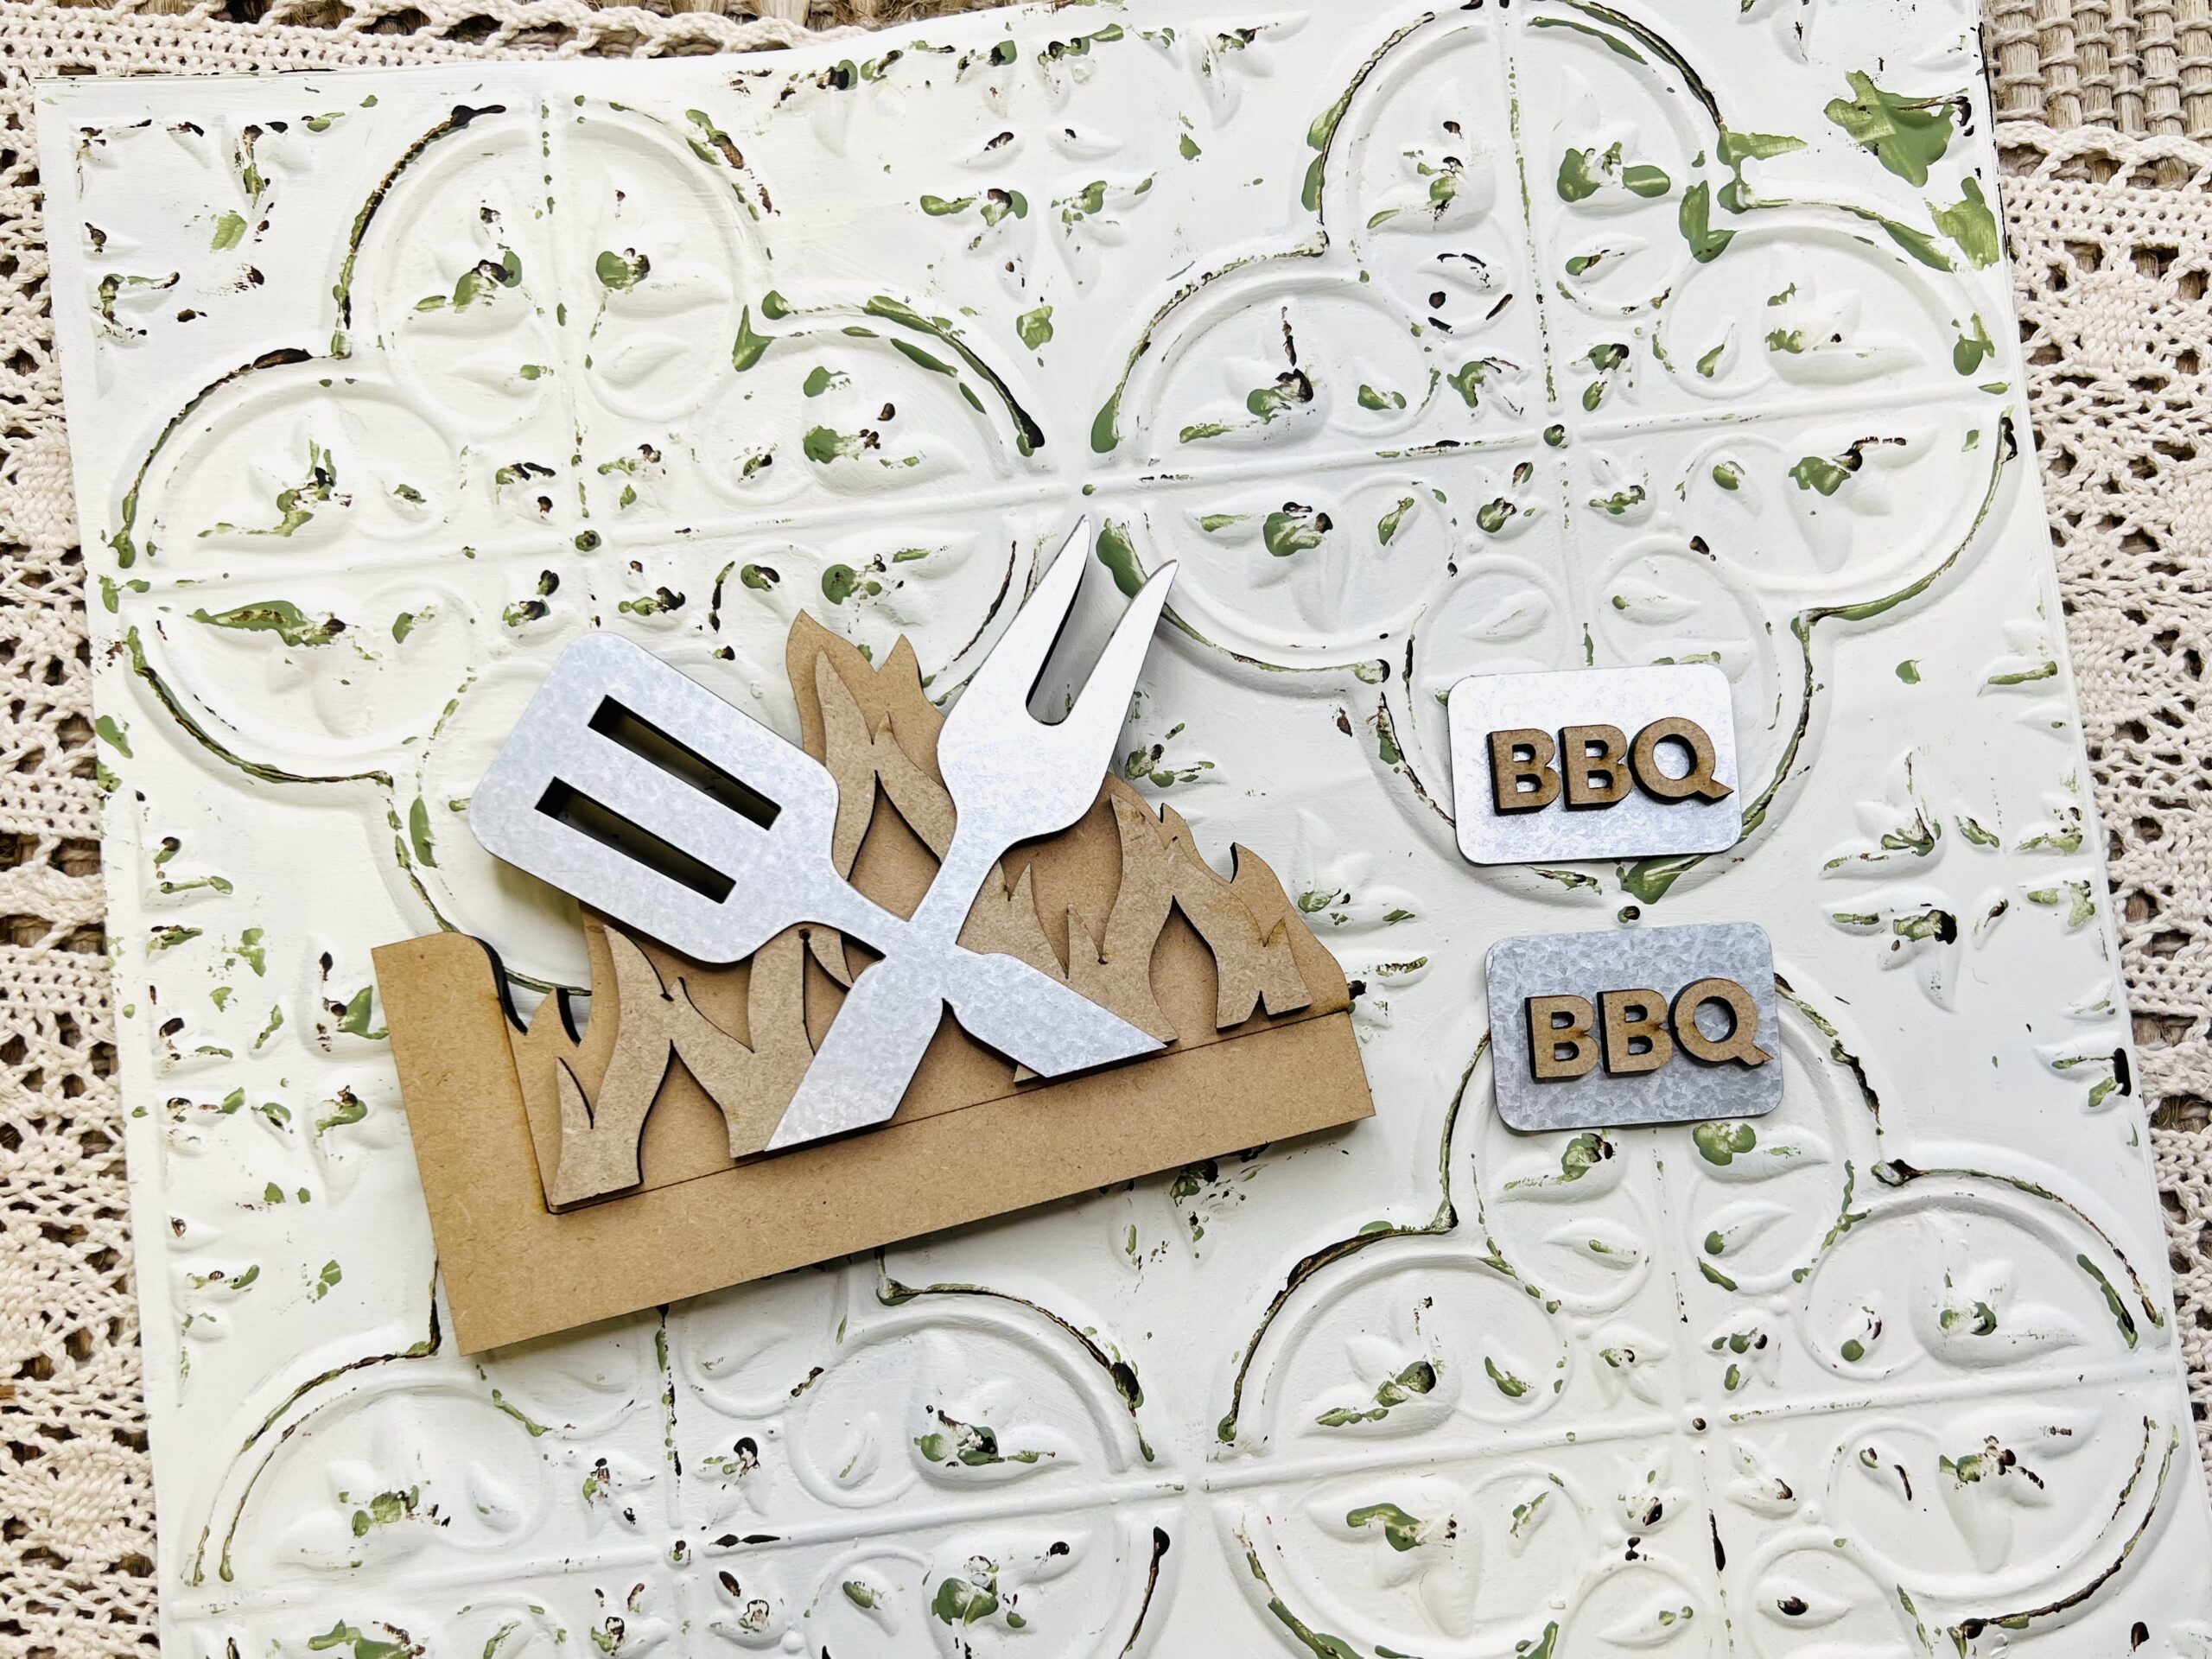 Wood and metal cutouts for crafting and diy projects. These are in the shape of flames and grilling tools.